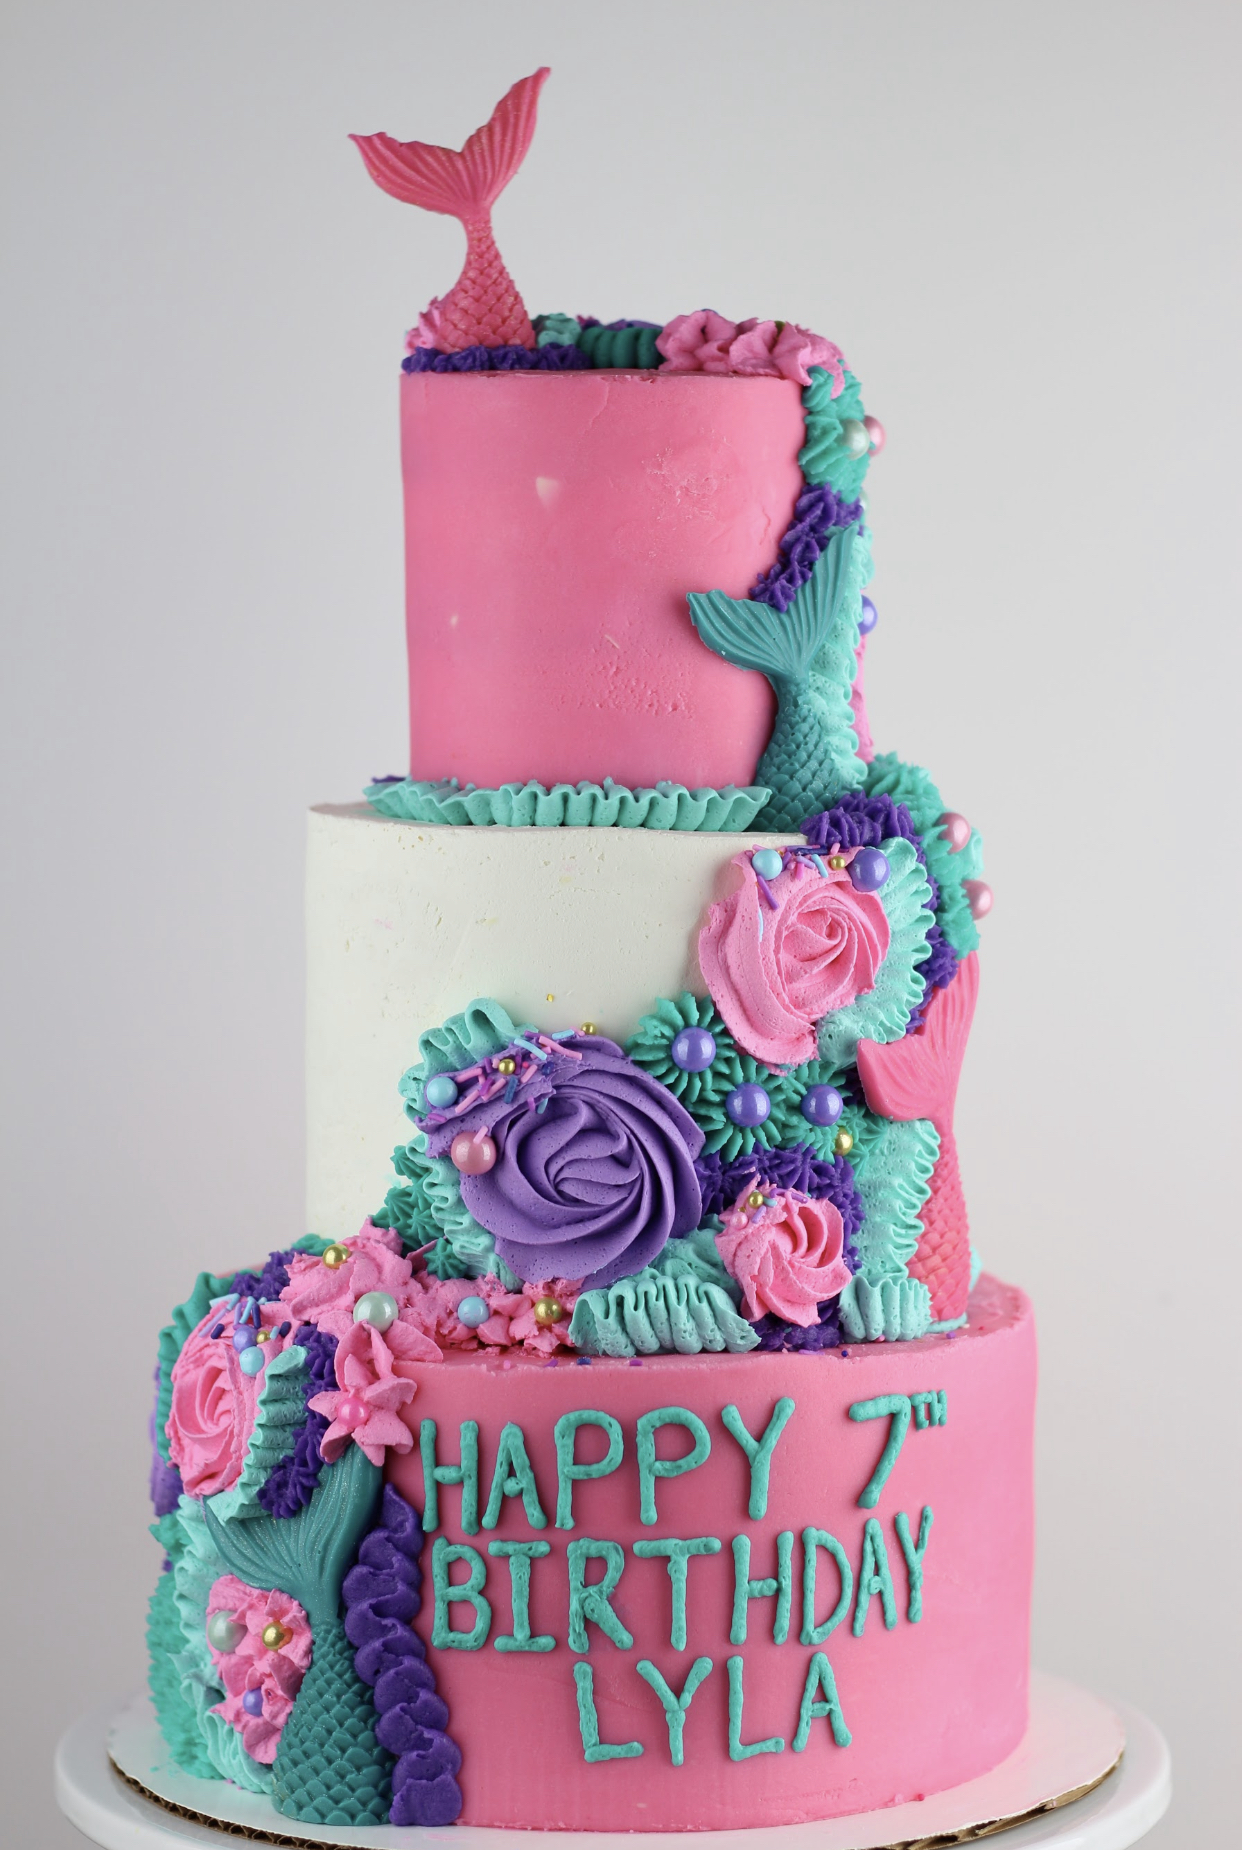 Learn how I made this Mermaid themed cake. I'm sharing the exact schedule I use to decorate a birthday cake for my kids. Learn how to decorate a birthday cake of your kids dreams.